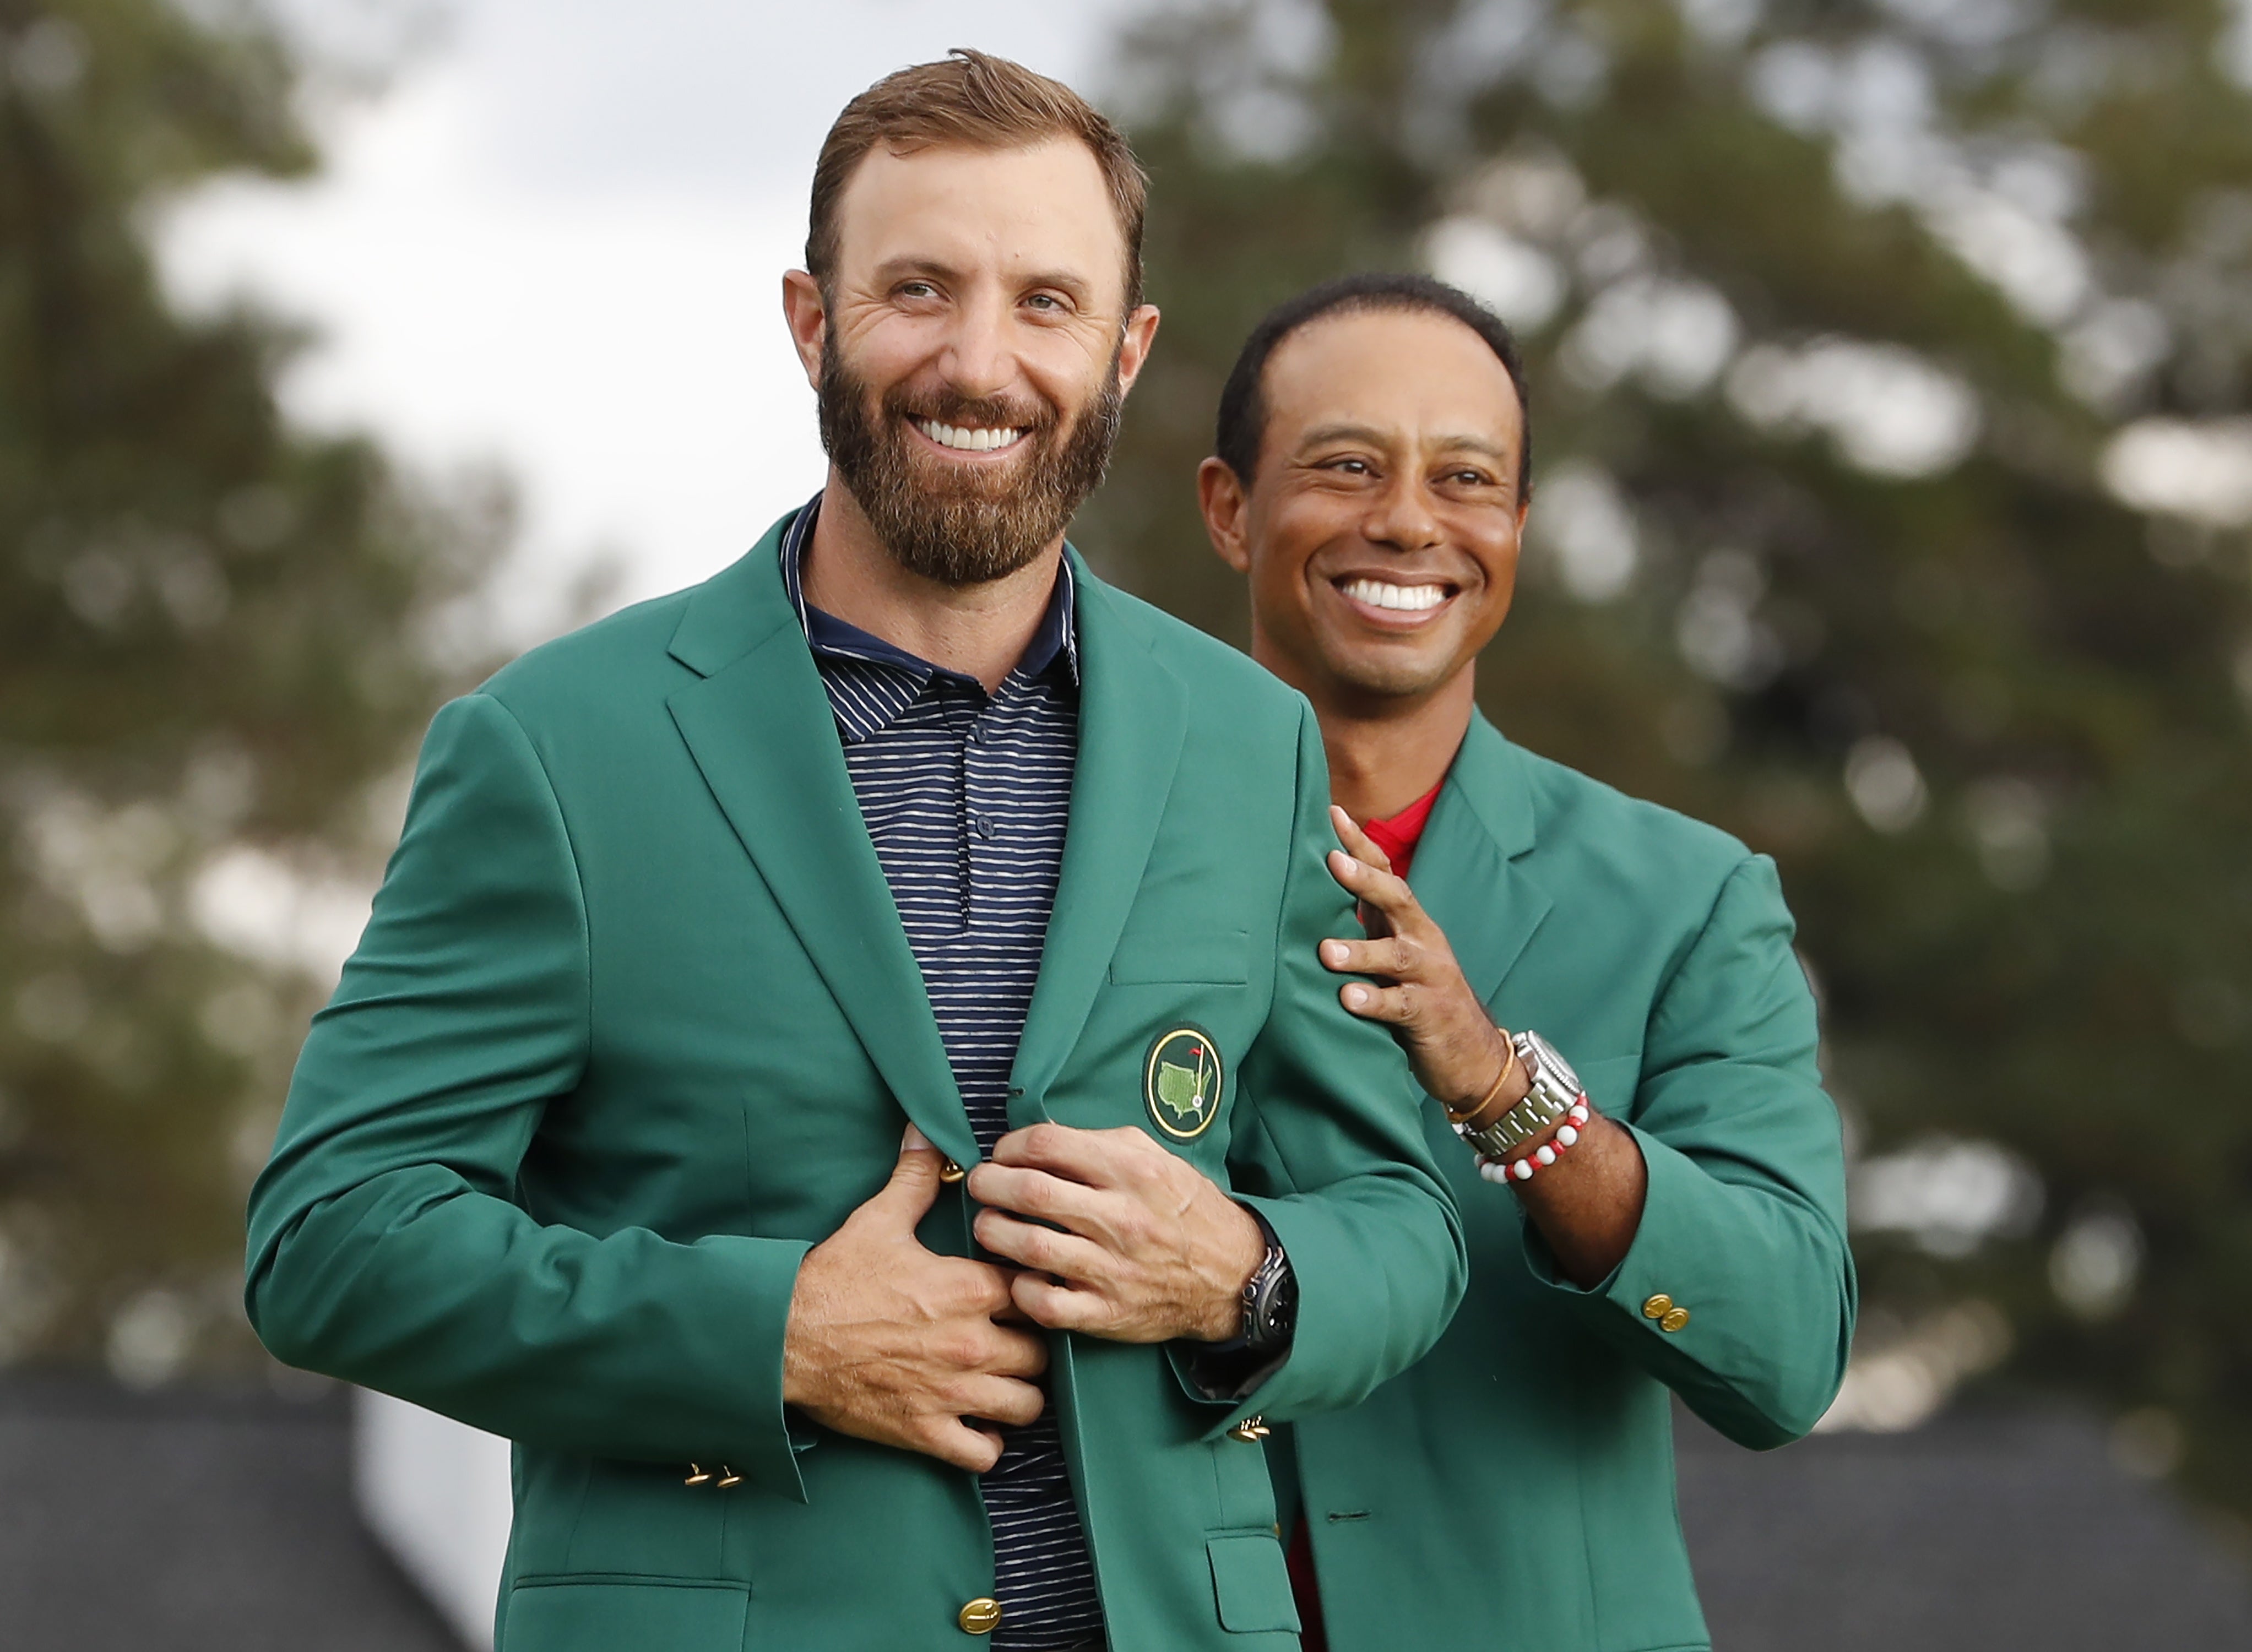 Dustin Johnson could barely believe his Masters victory as Tiger Woods presented him with the Green Jacket